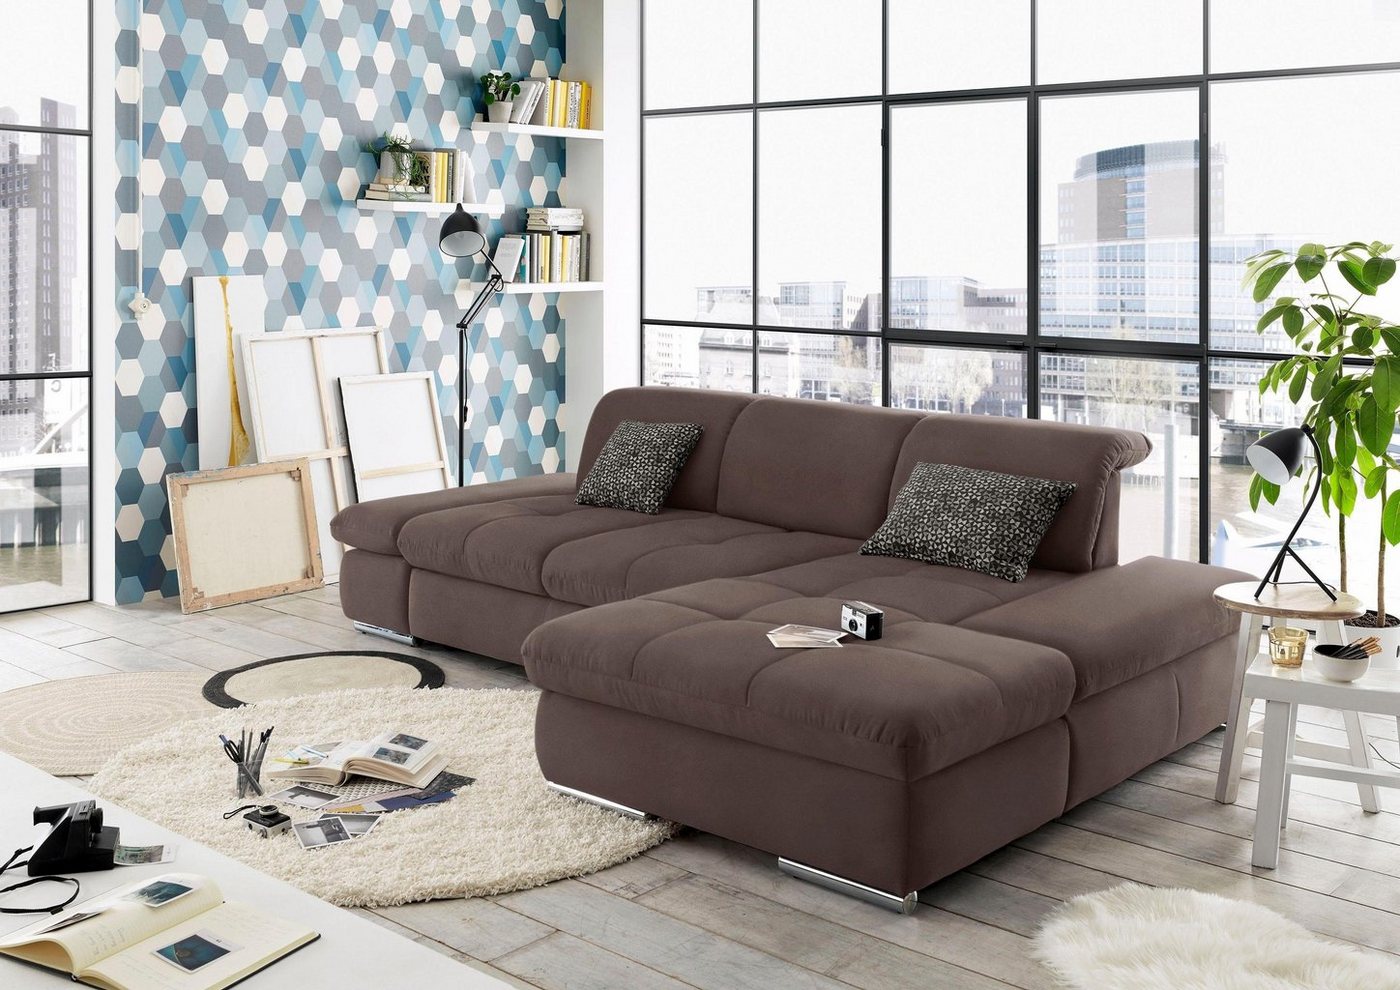 set one by Musterring Ecksofa SO 4100, Recamiere links oder rechts, wahlweise mit Bettfunktion von set one by Musterring